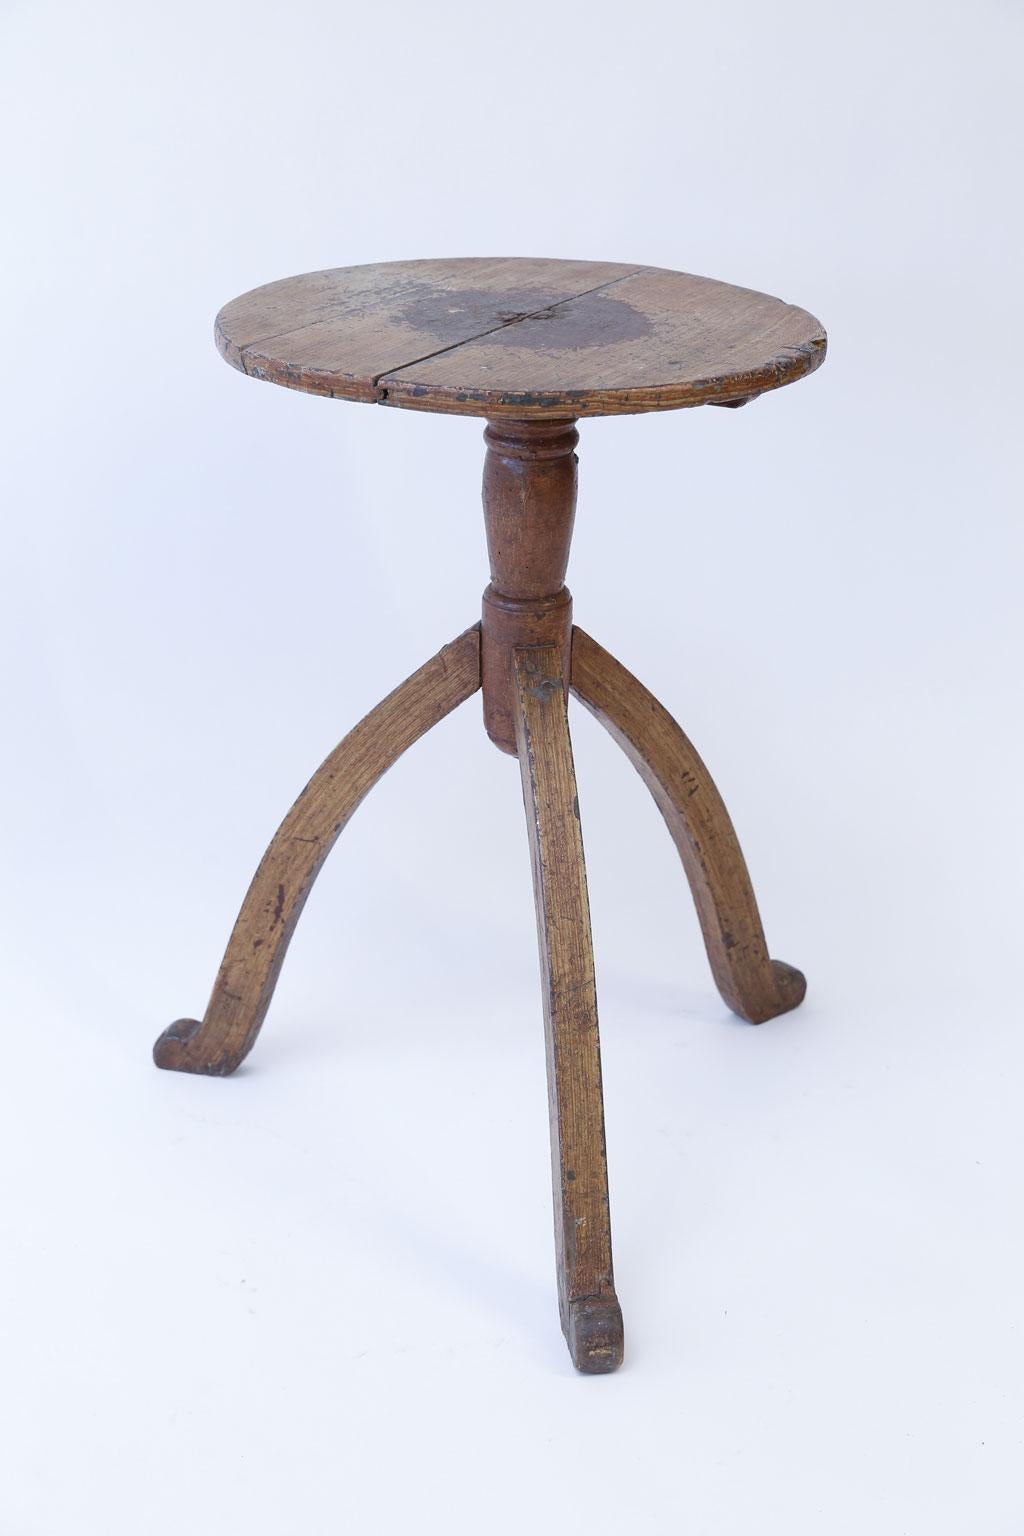 Quirky Swedish Folk Art table dating to the 19th century. Remnants of original or very old paint. Charming and unusual.